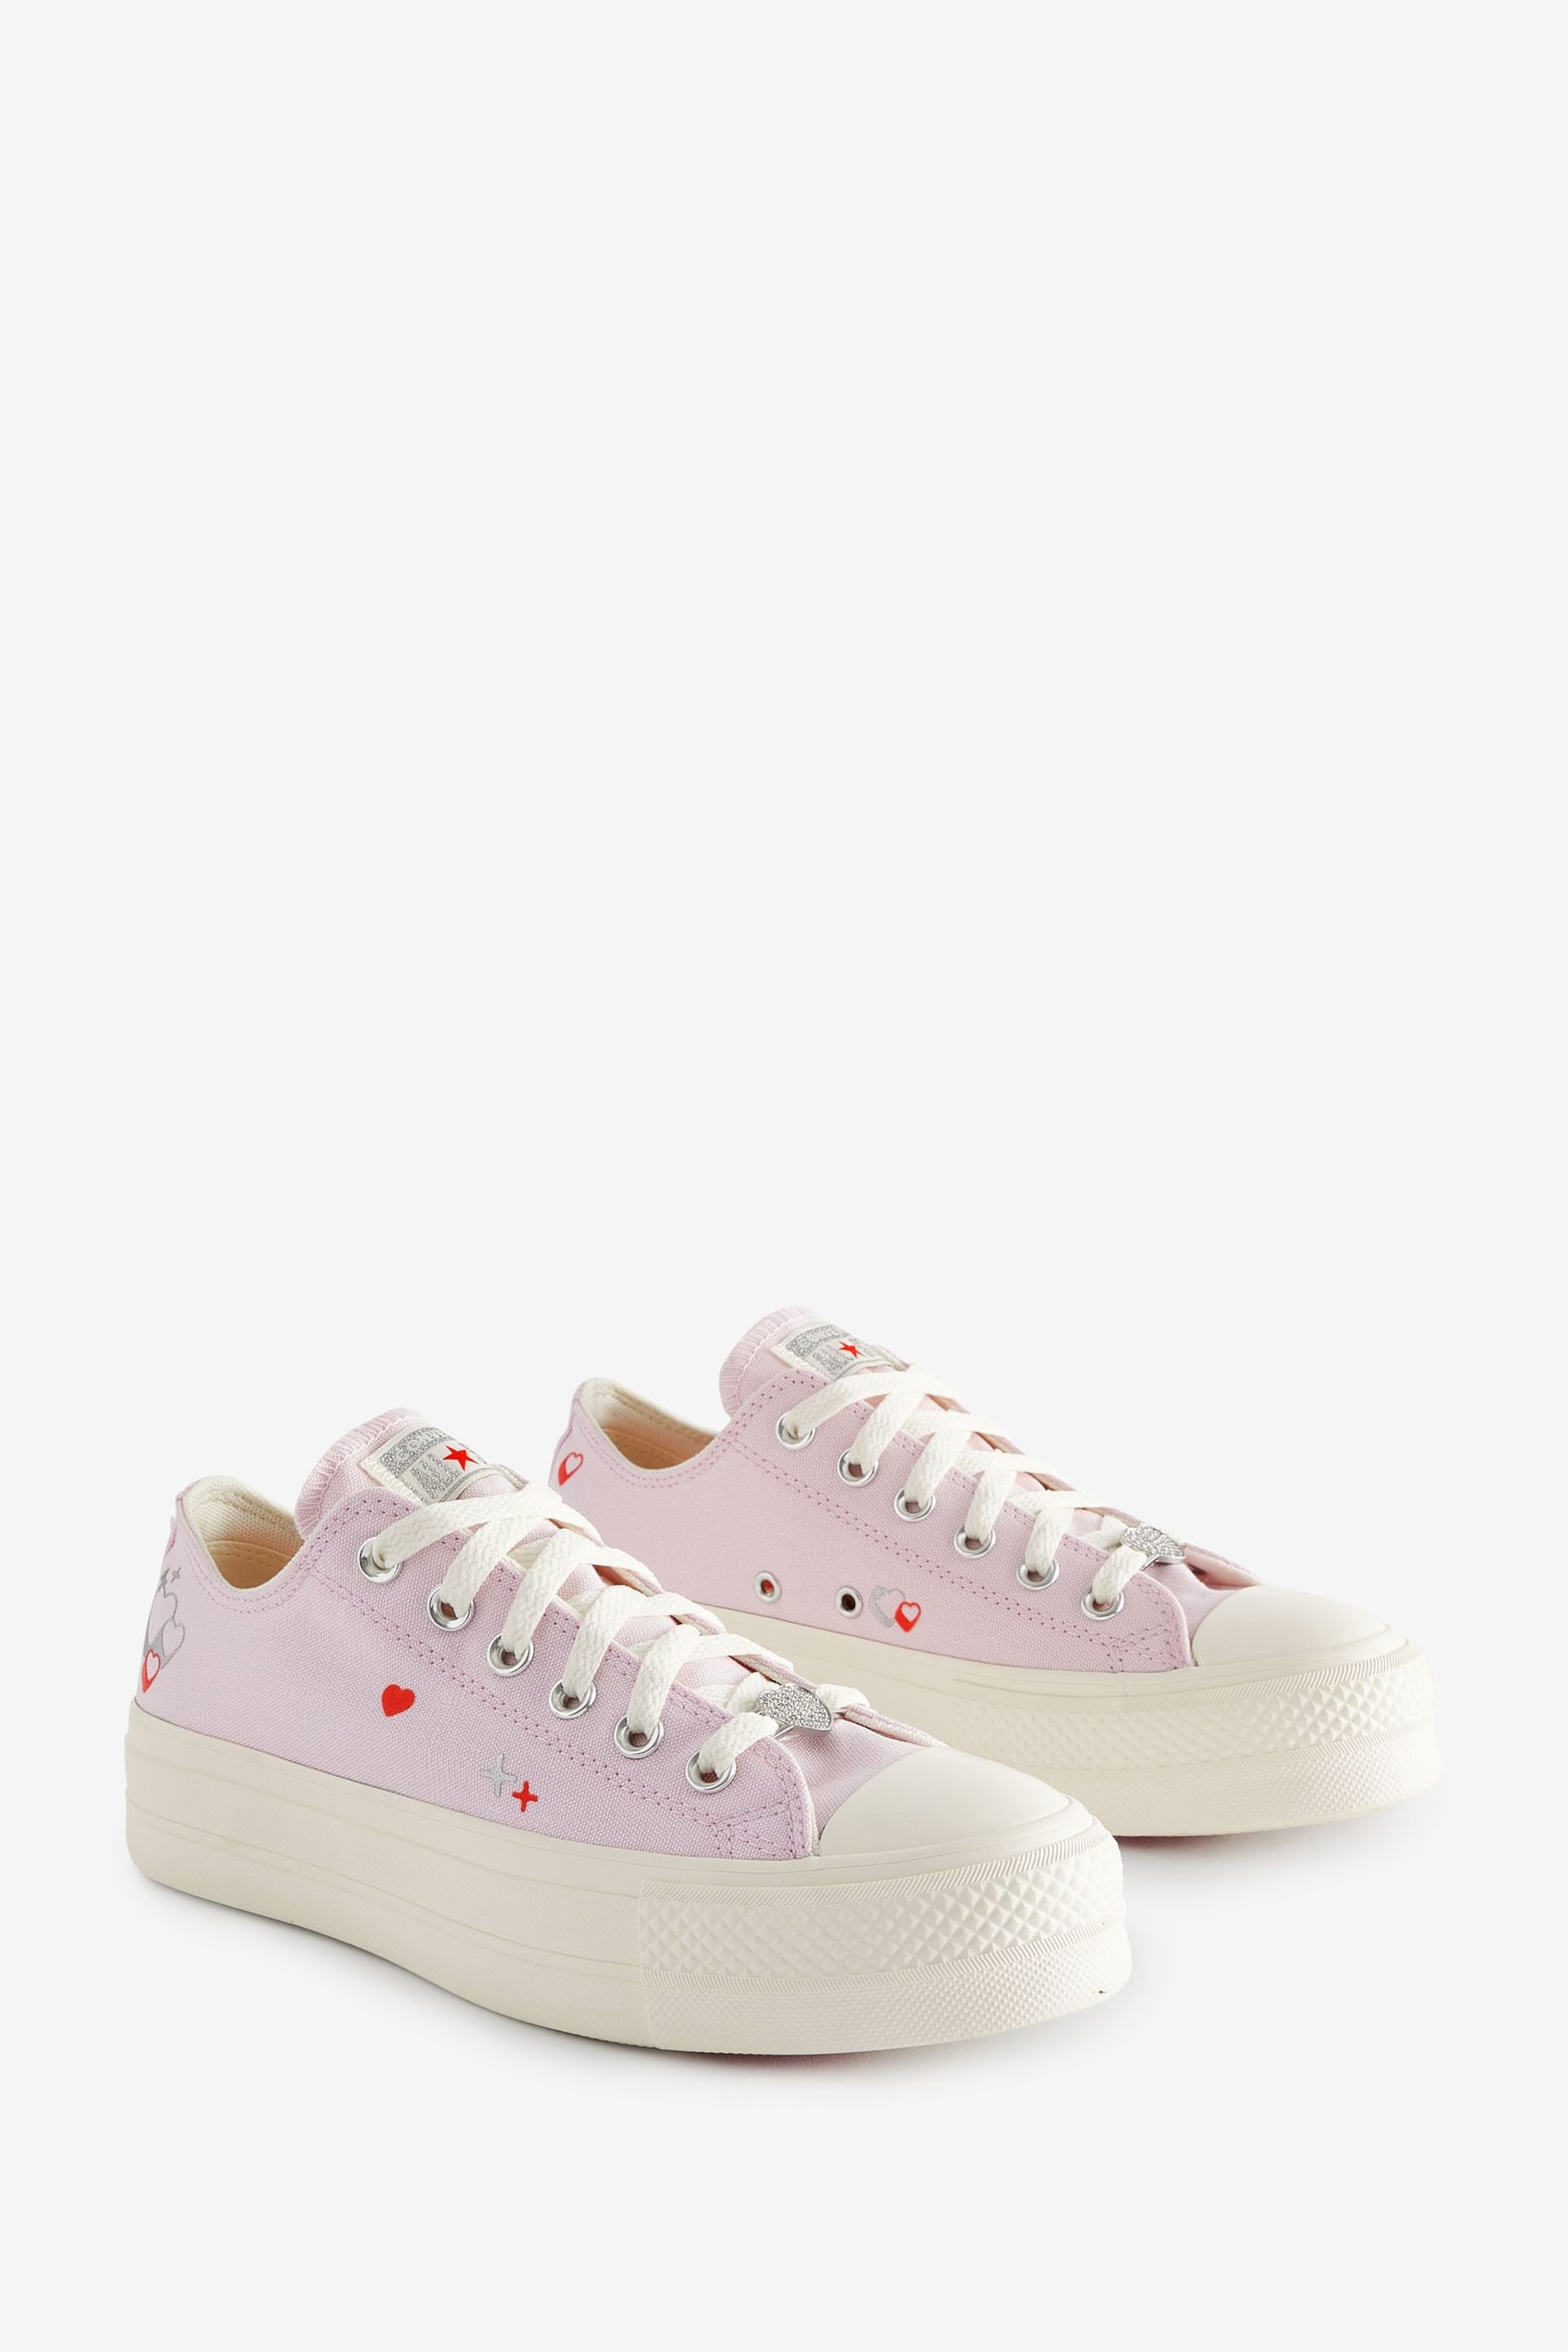 Converse Purple Heart Embroidered Ox Lift Trainers - Image 6 of 12